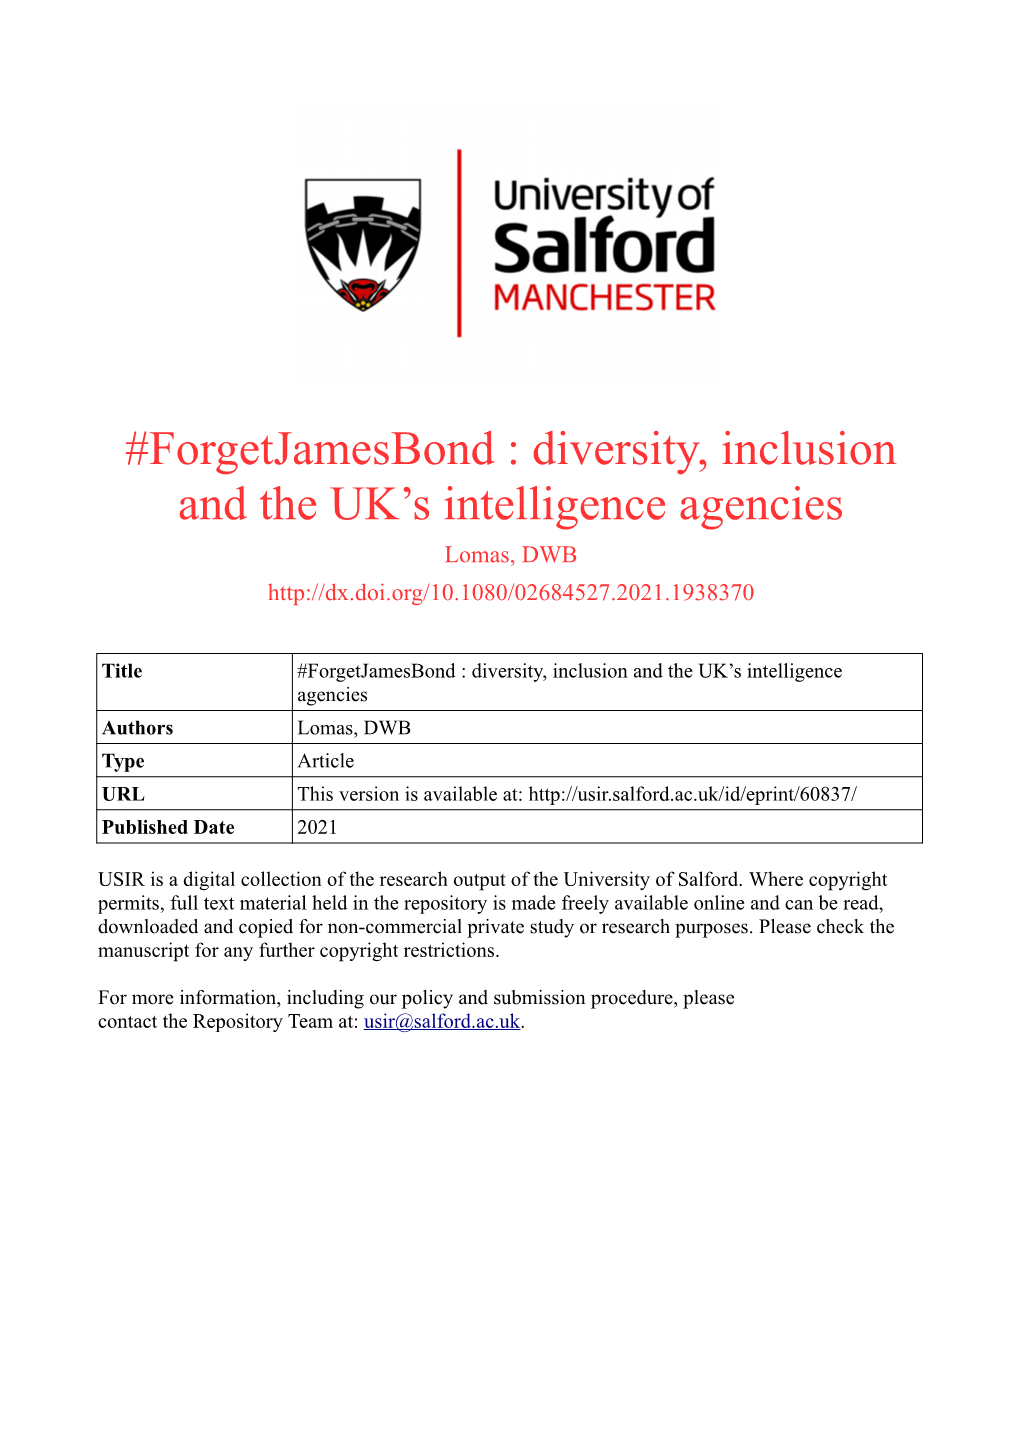 Forgetjamesbond: Diversity, Inclusion and the UK's Intelligence